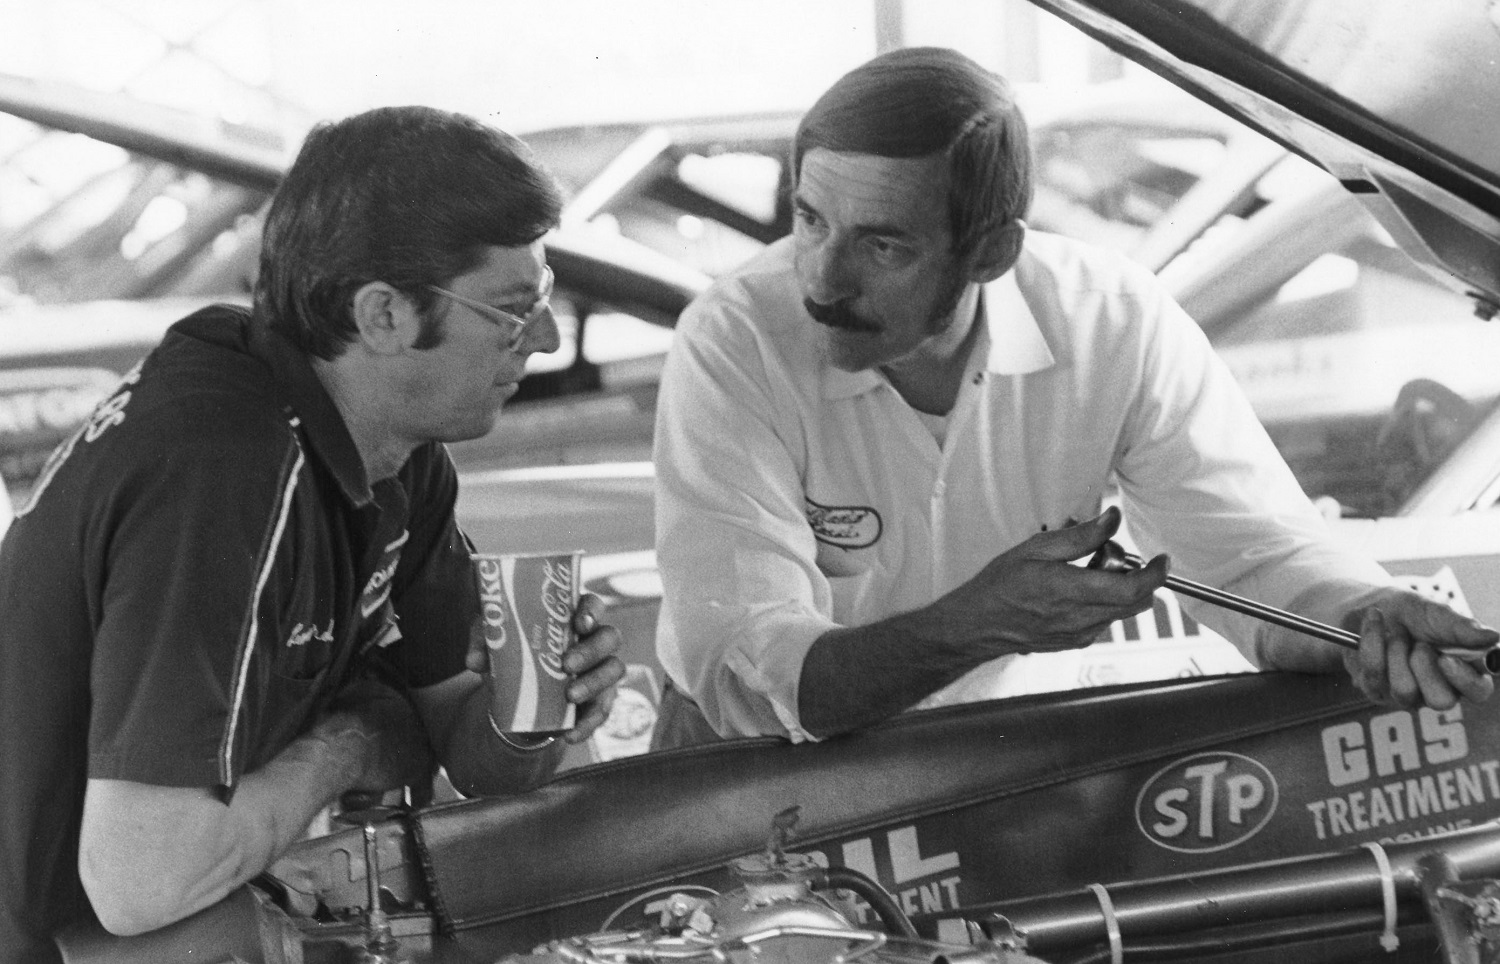 Renowned NASCAR mechanics Leonard Wood and Mario Rossi chat in the garage area at a NASCAR Cup race.